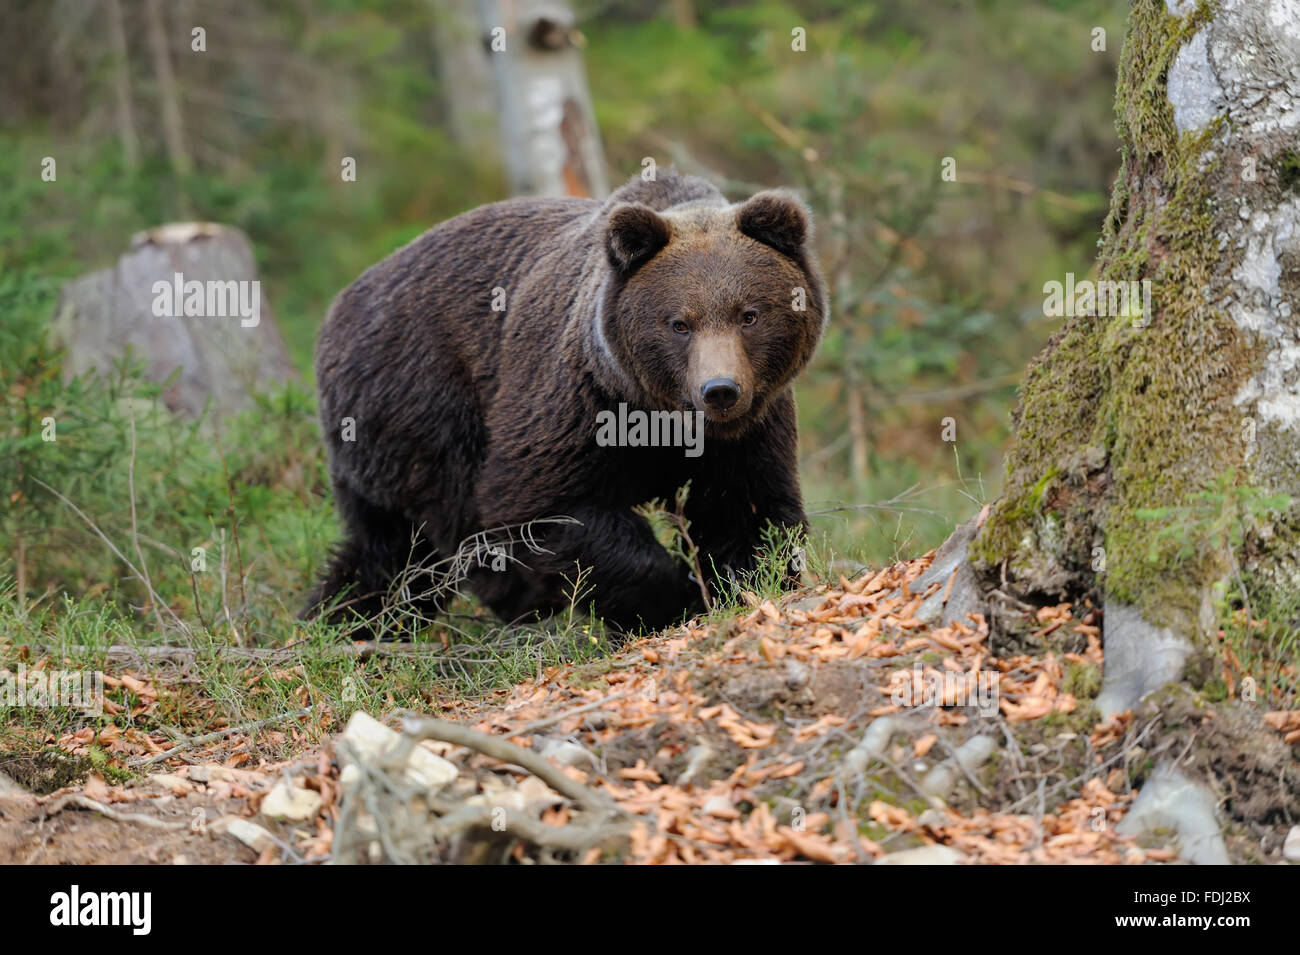 A big brown bear in the forest Stock Photo